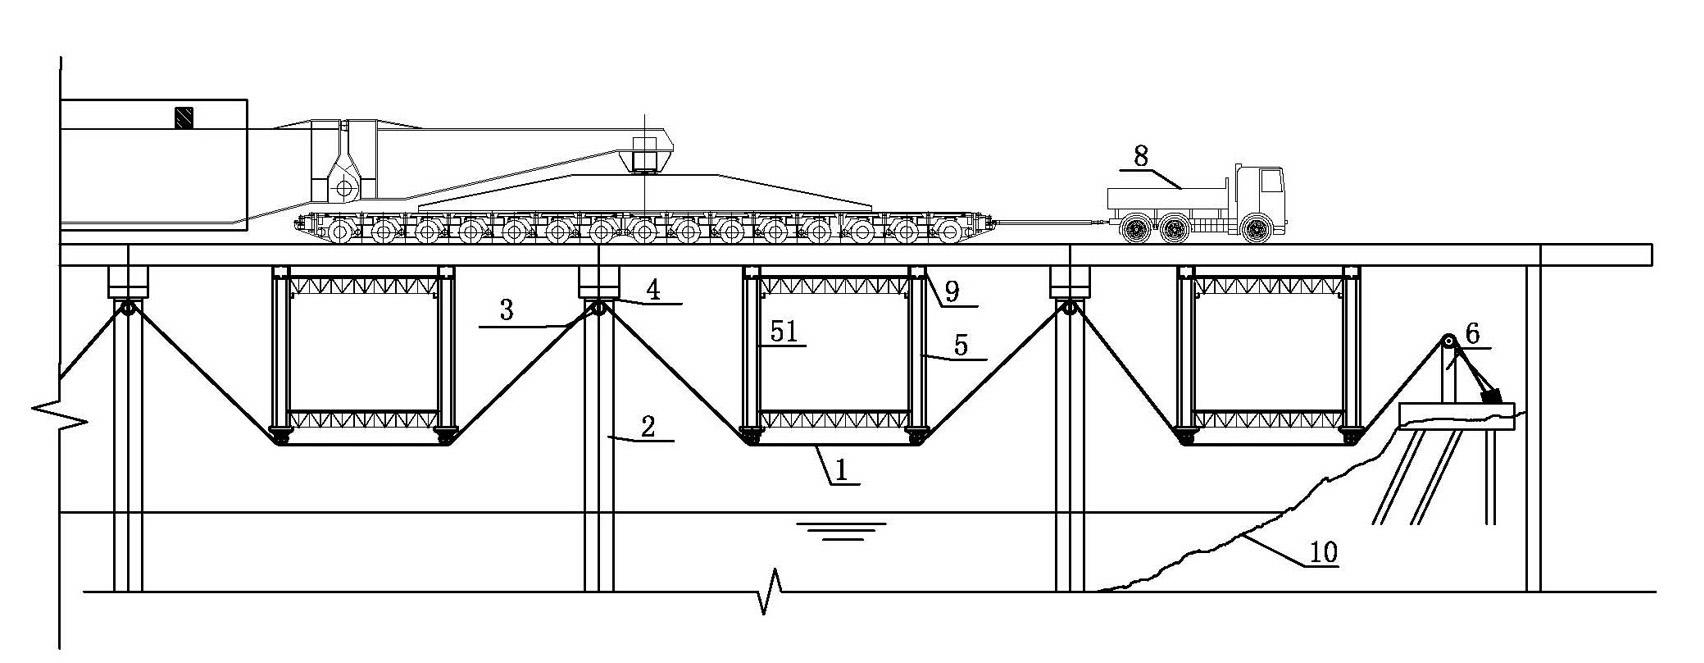 Method and device for reinforcing bridge by external pre-stressed strands under bridge